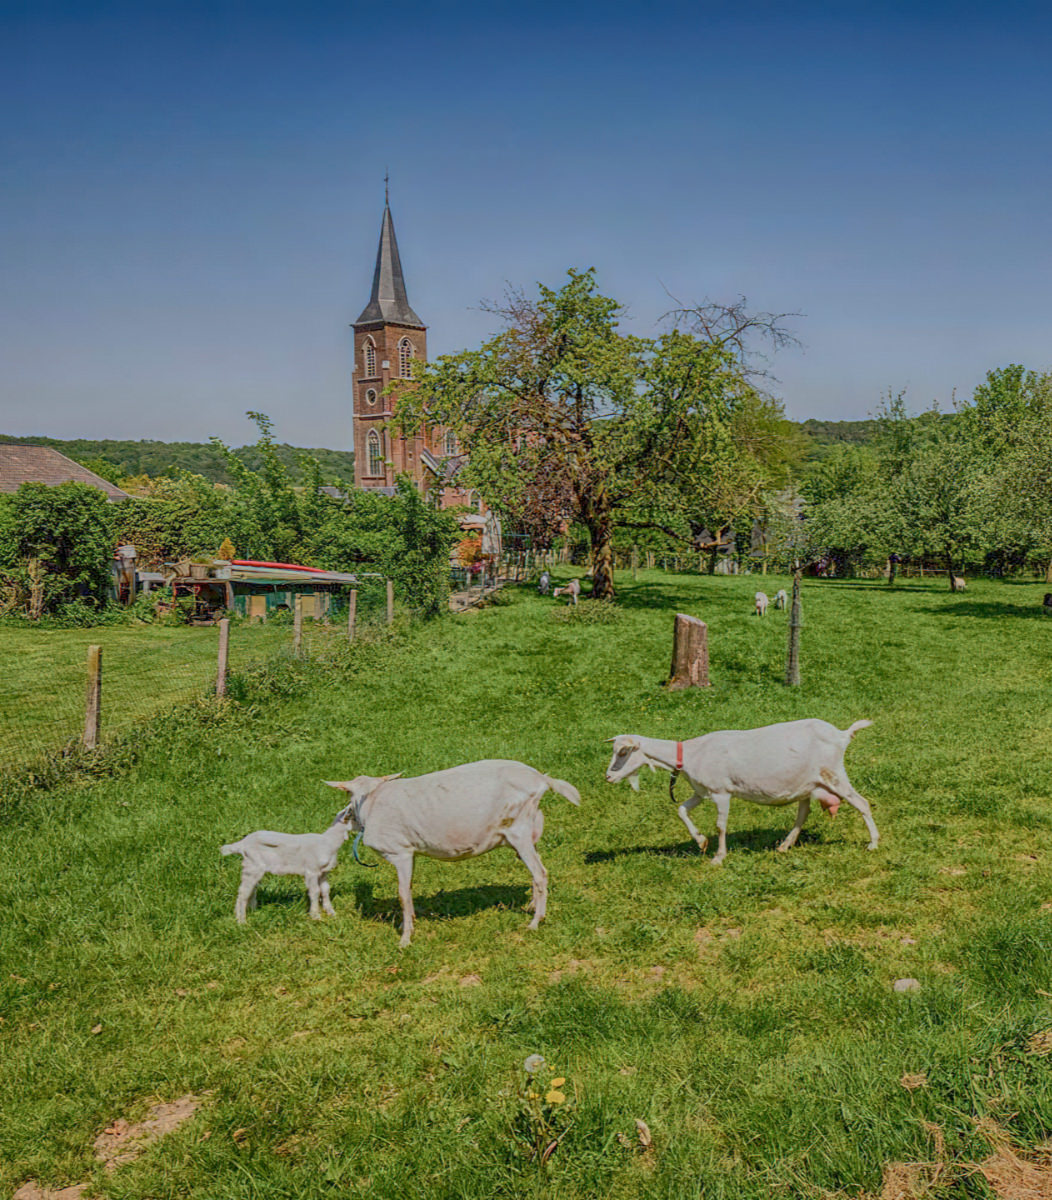 The goats of Mostert Hoeve